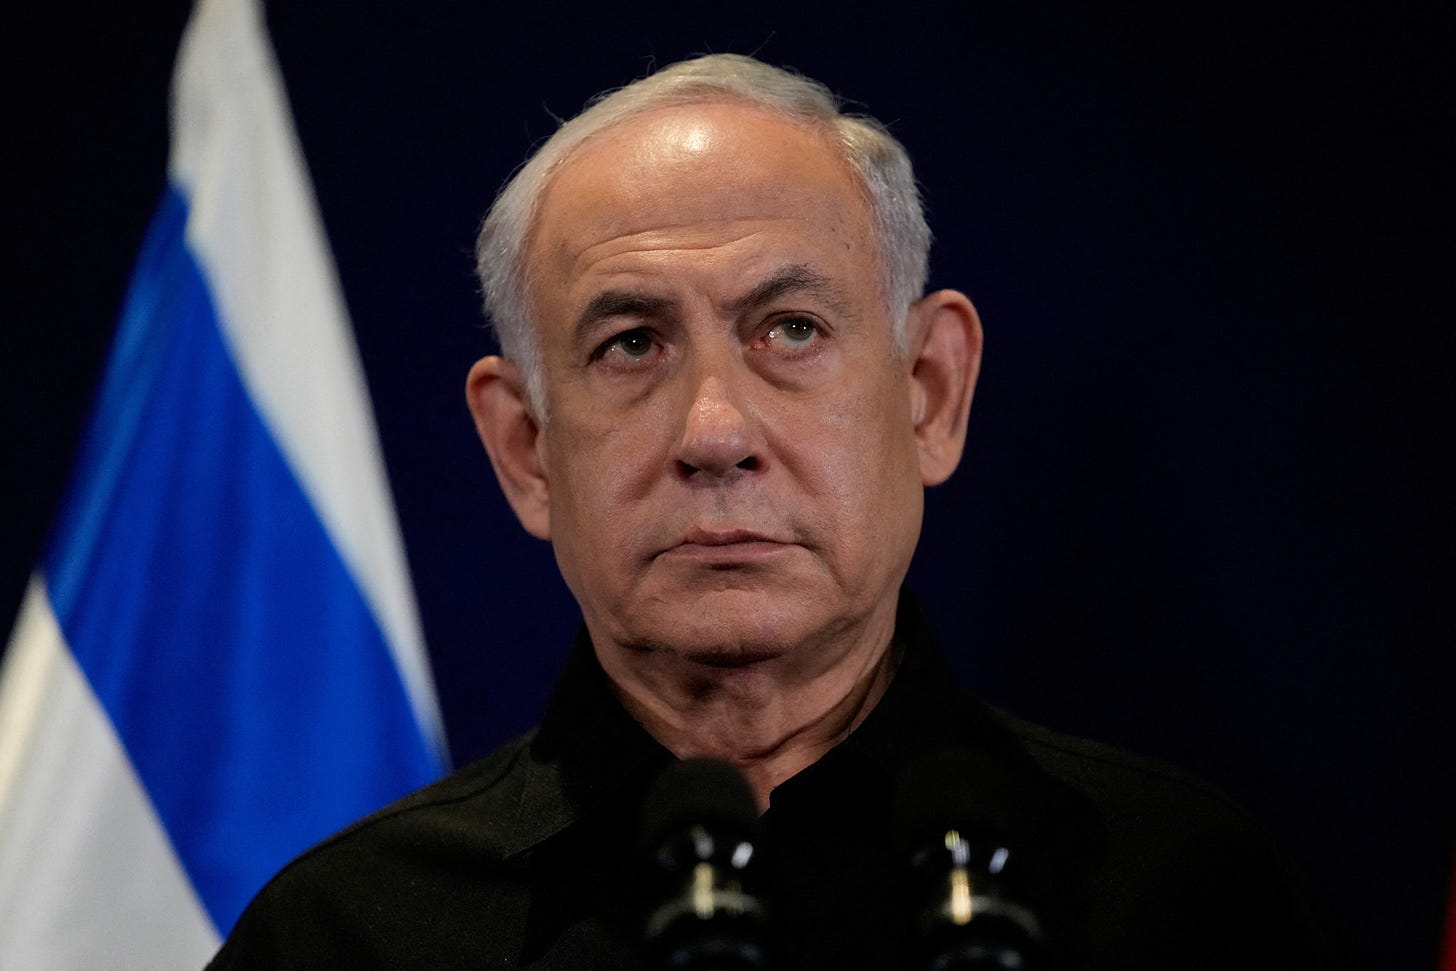 Most Israelis think Netanyahu responsible for failing to prevent Hamas  attack, poll shows | Reuters